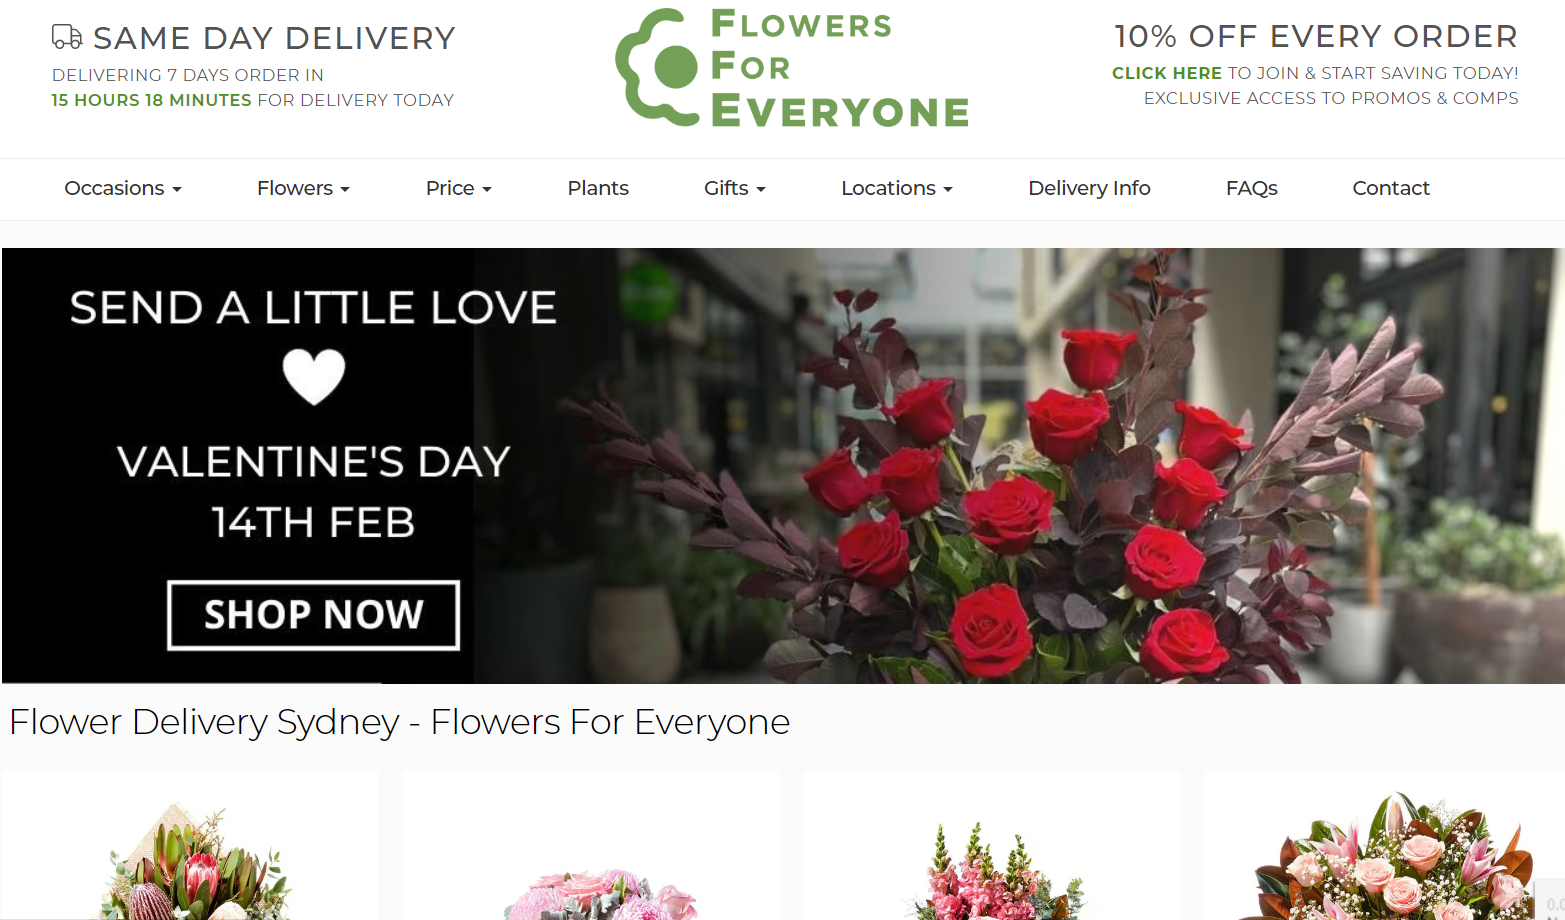 25 Florist Website Design Examples We Love [+ How To Make Your Own]